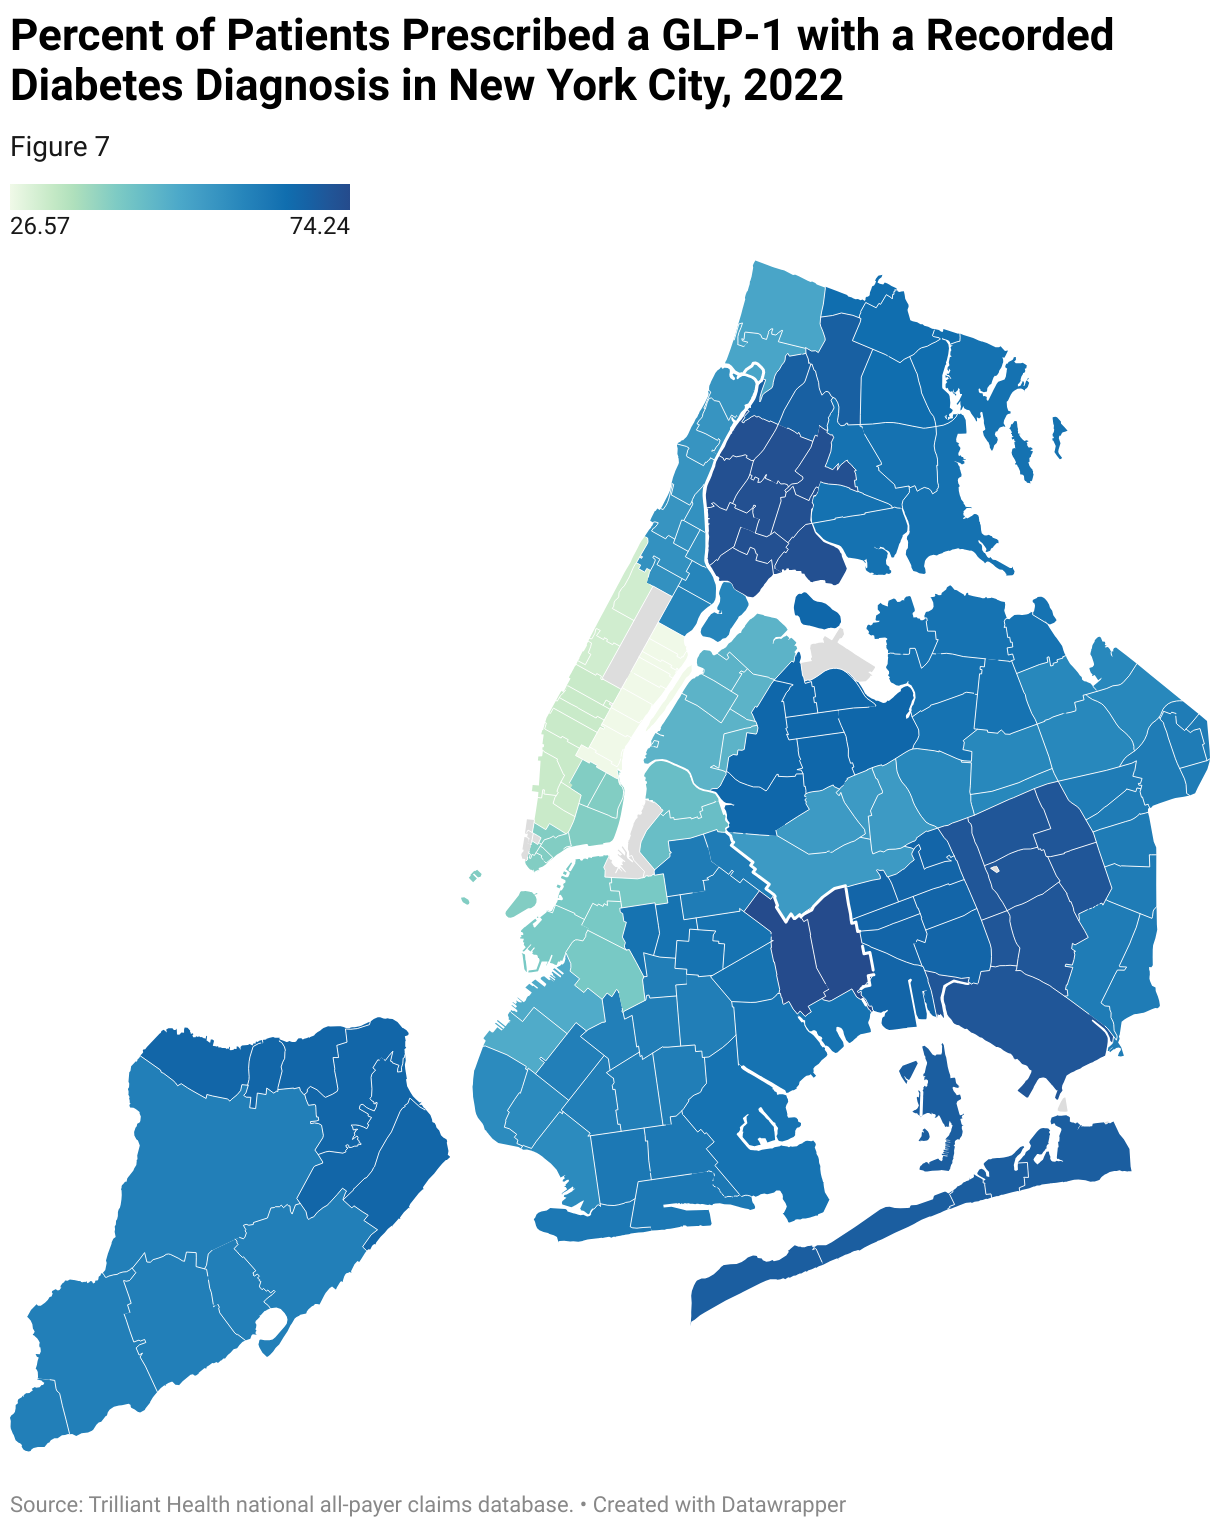 A map of New York City shows the percent of patients prescribed GLP-1s with a recorded diabetes diagnosis, with high off-label usage in the Upper East Side.